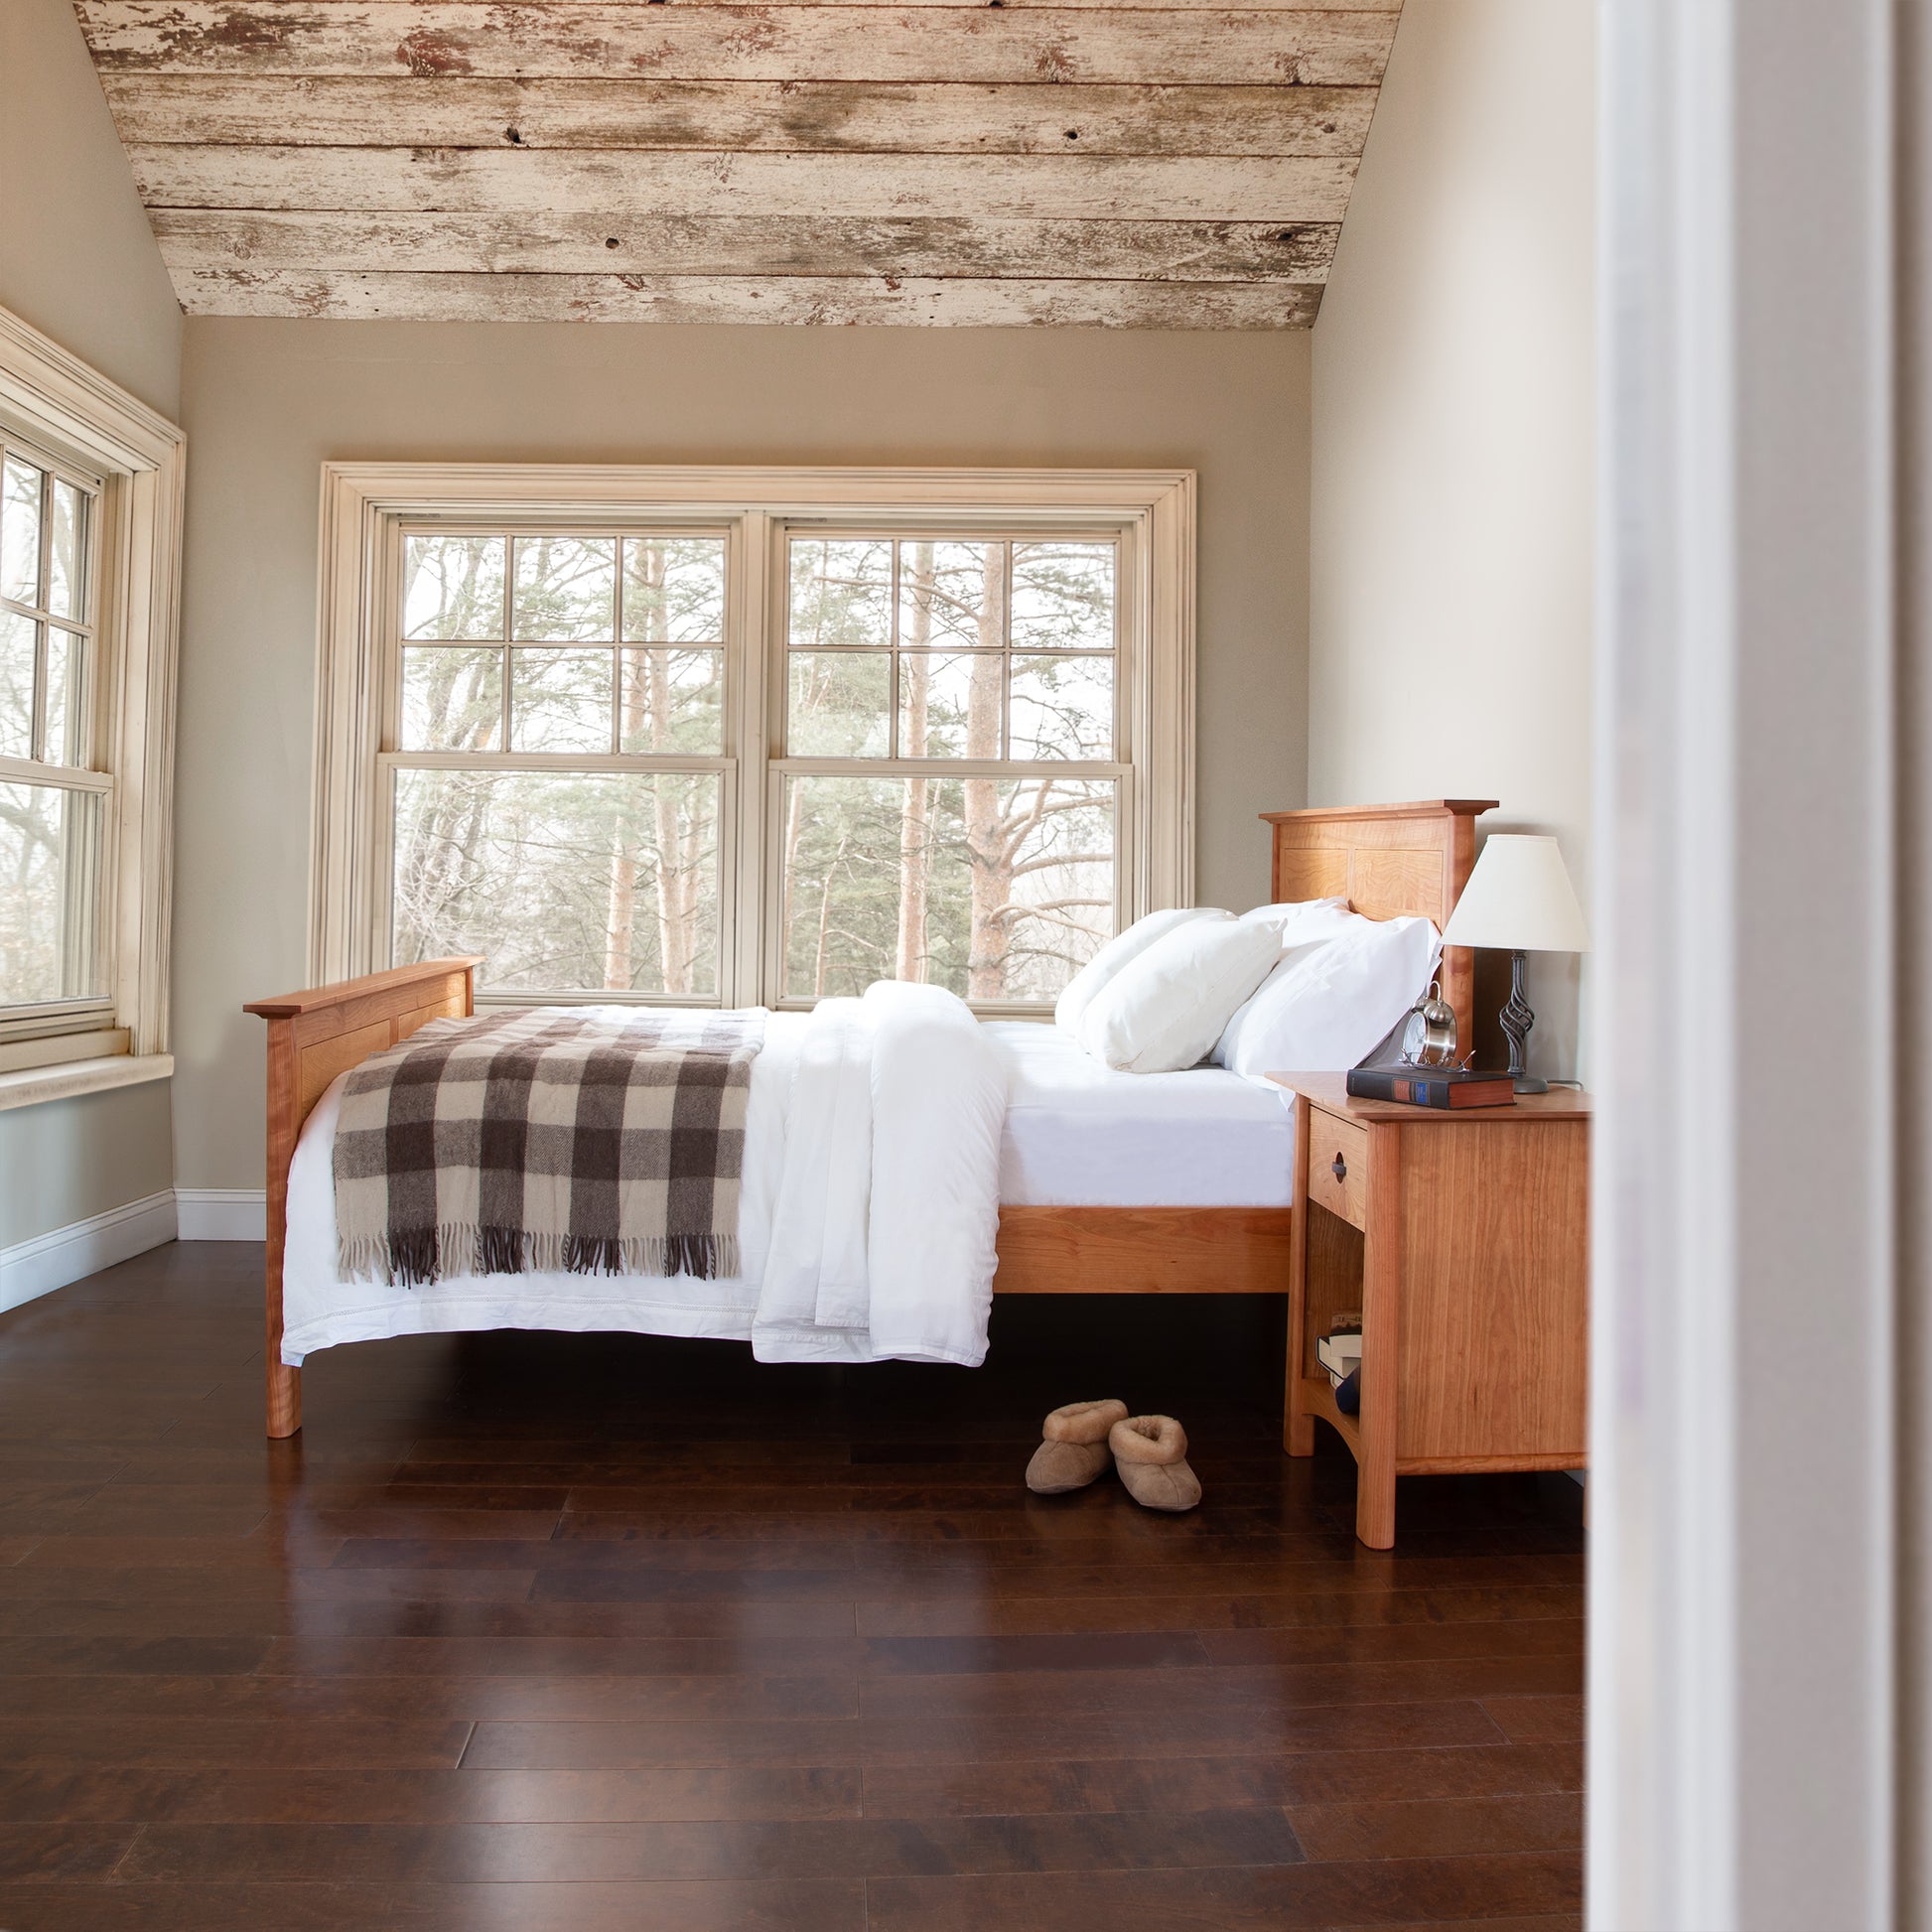 A cozy bedroom with a Maple Corner Woodworks Cherry Moon Panel Bed and side table, white bedding, and a plaid throw. Slippers are placed on the hardwood floor, large windows show a wooded view, and the